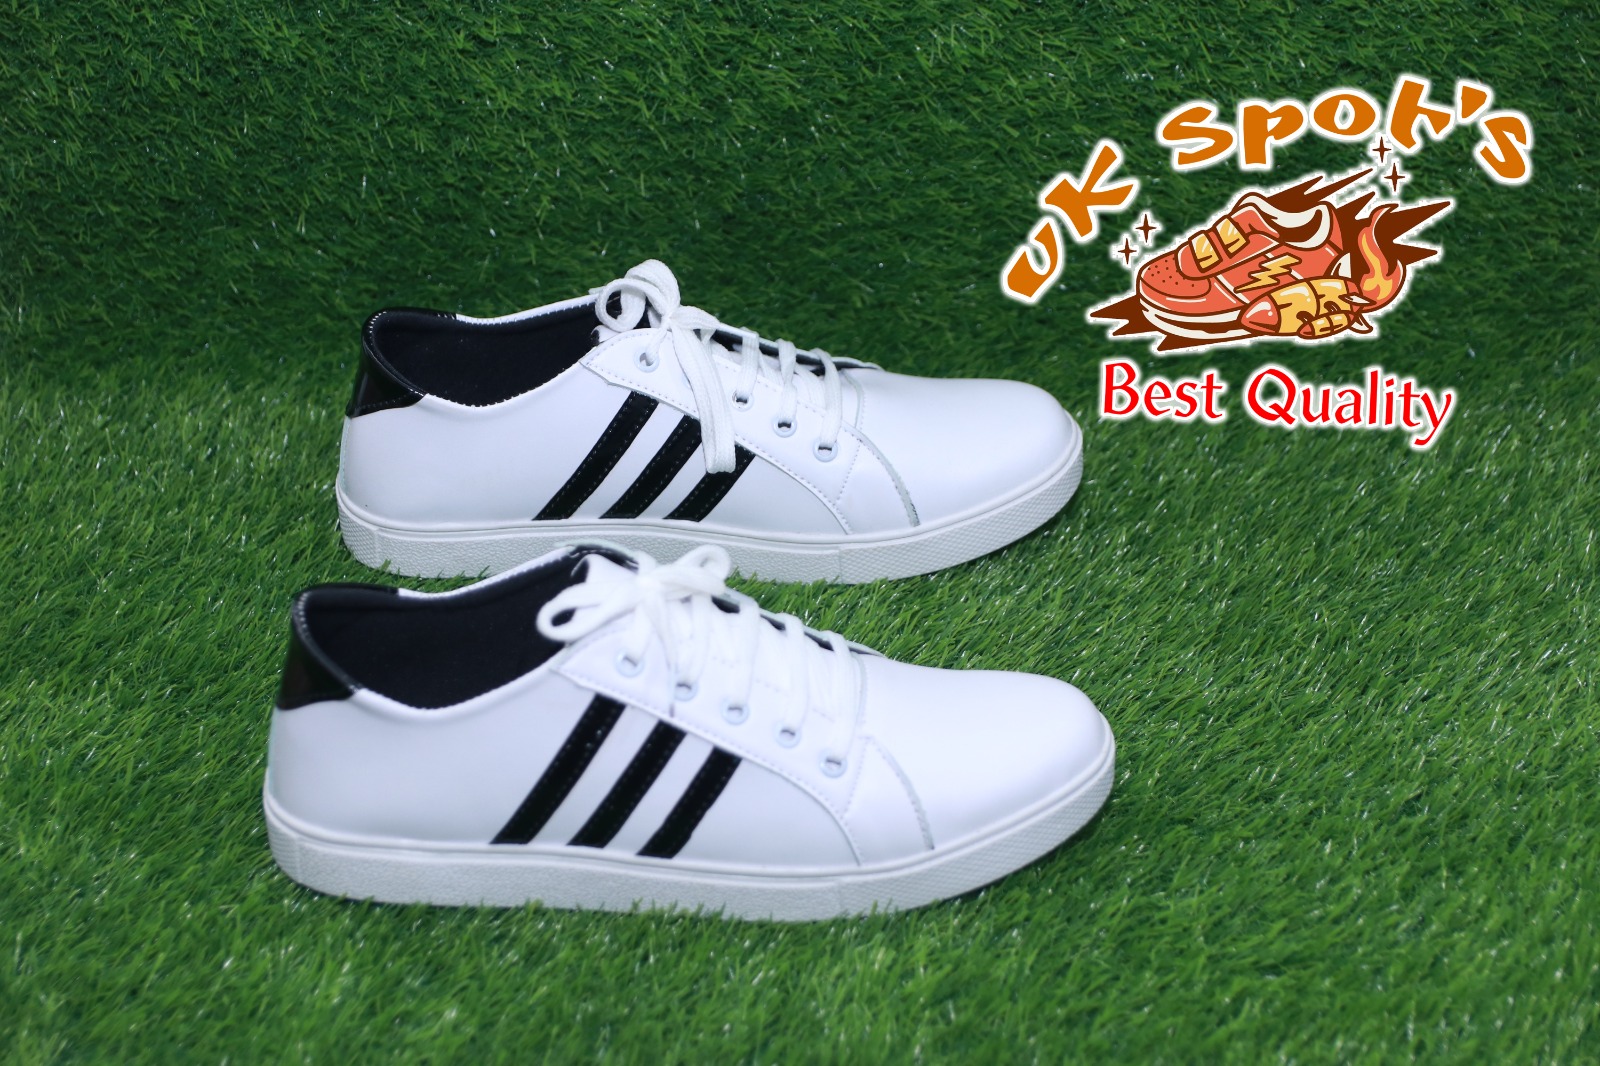 BUY】 White Supreme Shoes for Men best Price Pakistan 